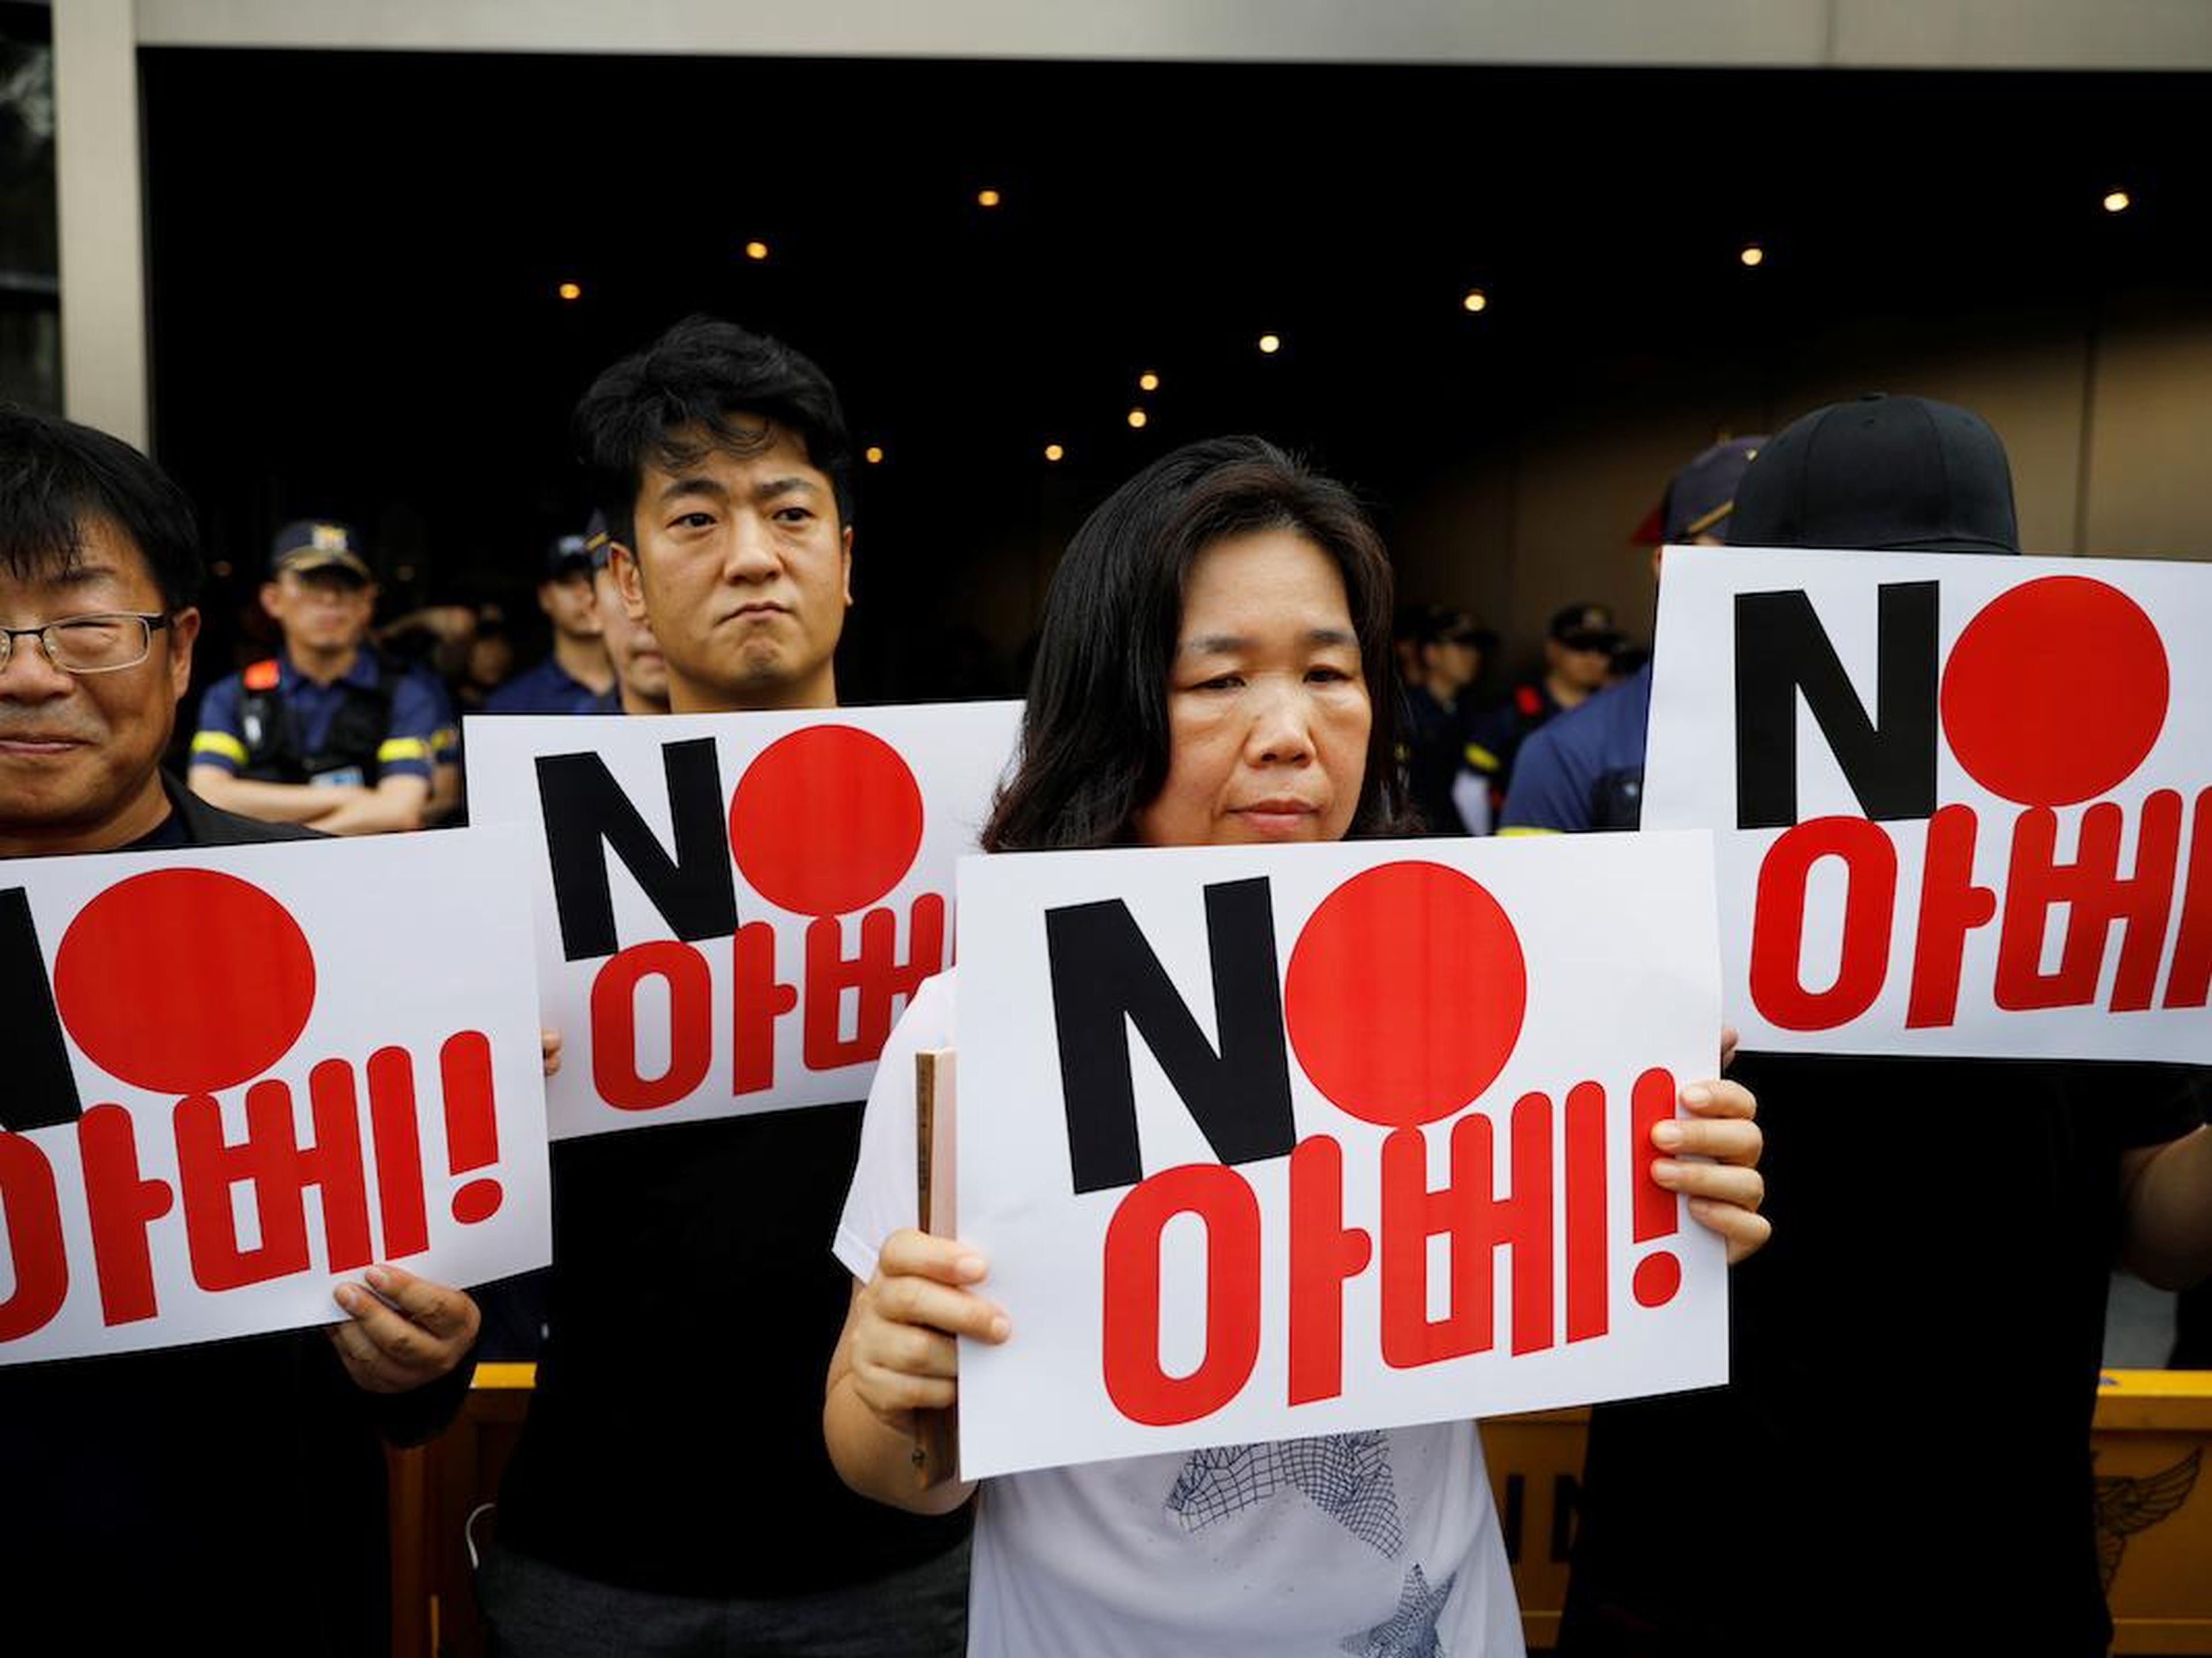 Protesters holding up signs that say "No Abe," referring to Japanese Prime Minister Shinzo Abe, outside the Japanese embassy in Seoul, South Korea, in August 2019.